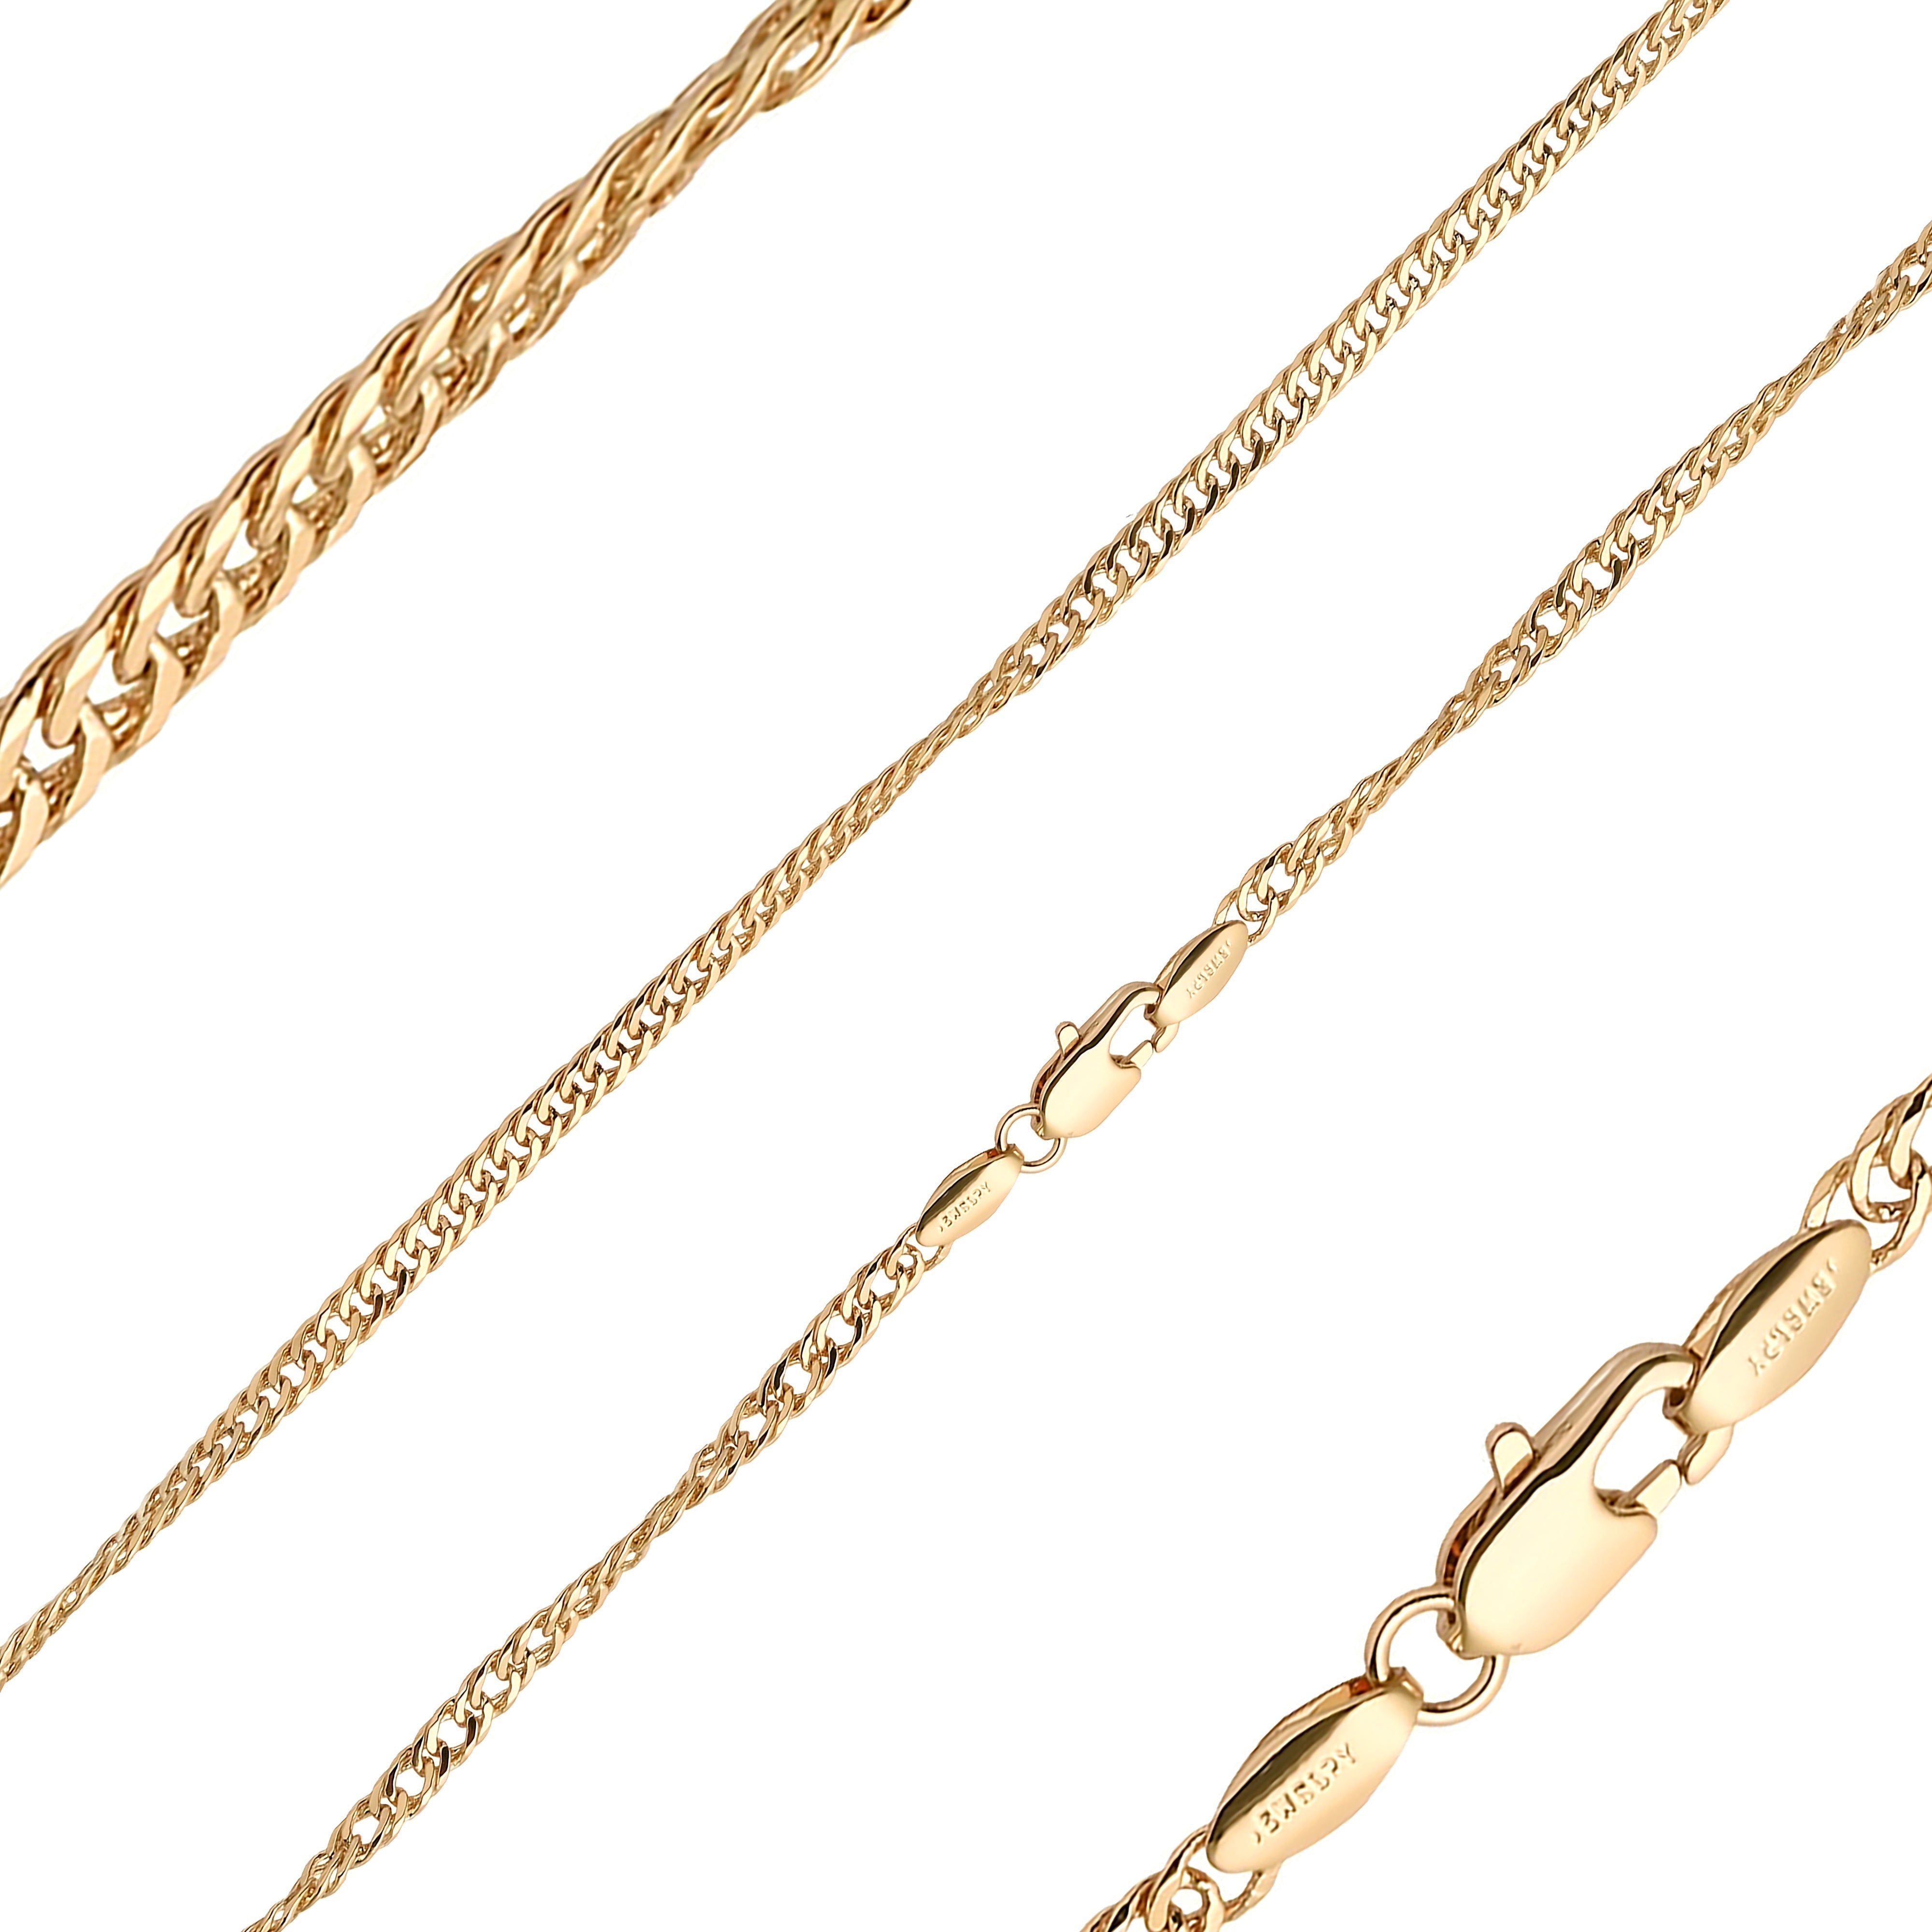 Double cuban link 14K Gold, 18K Gold, White Gold chains